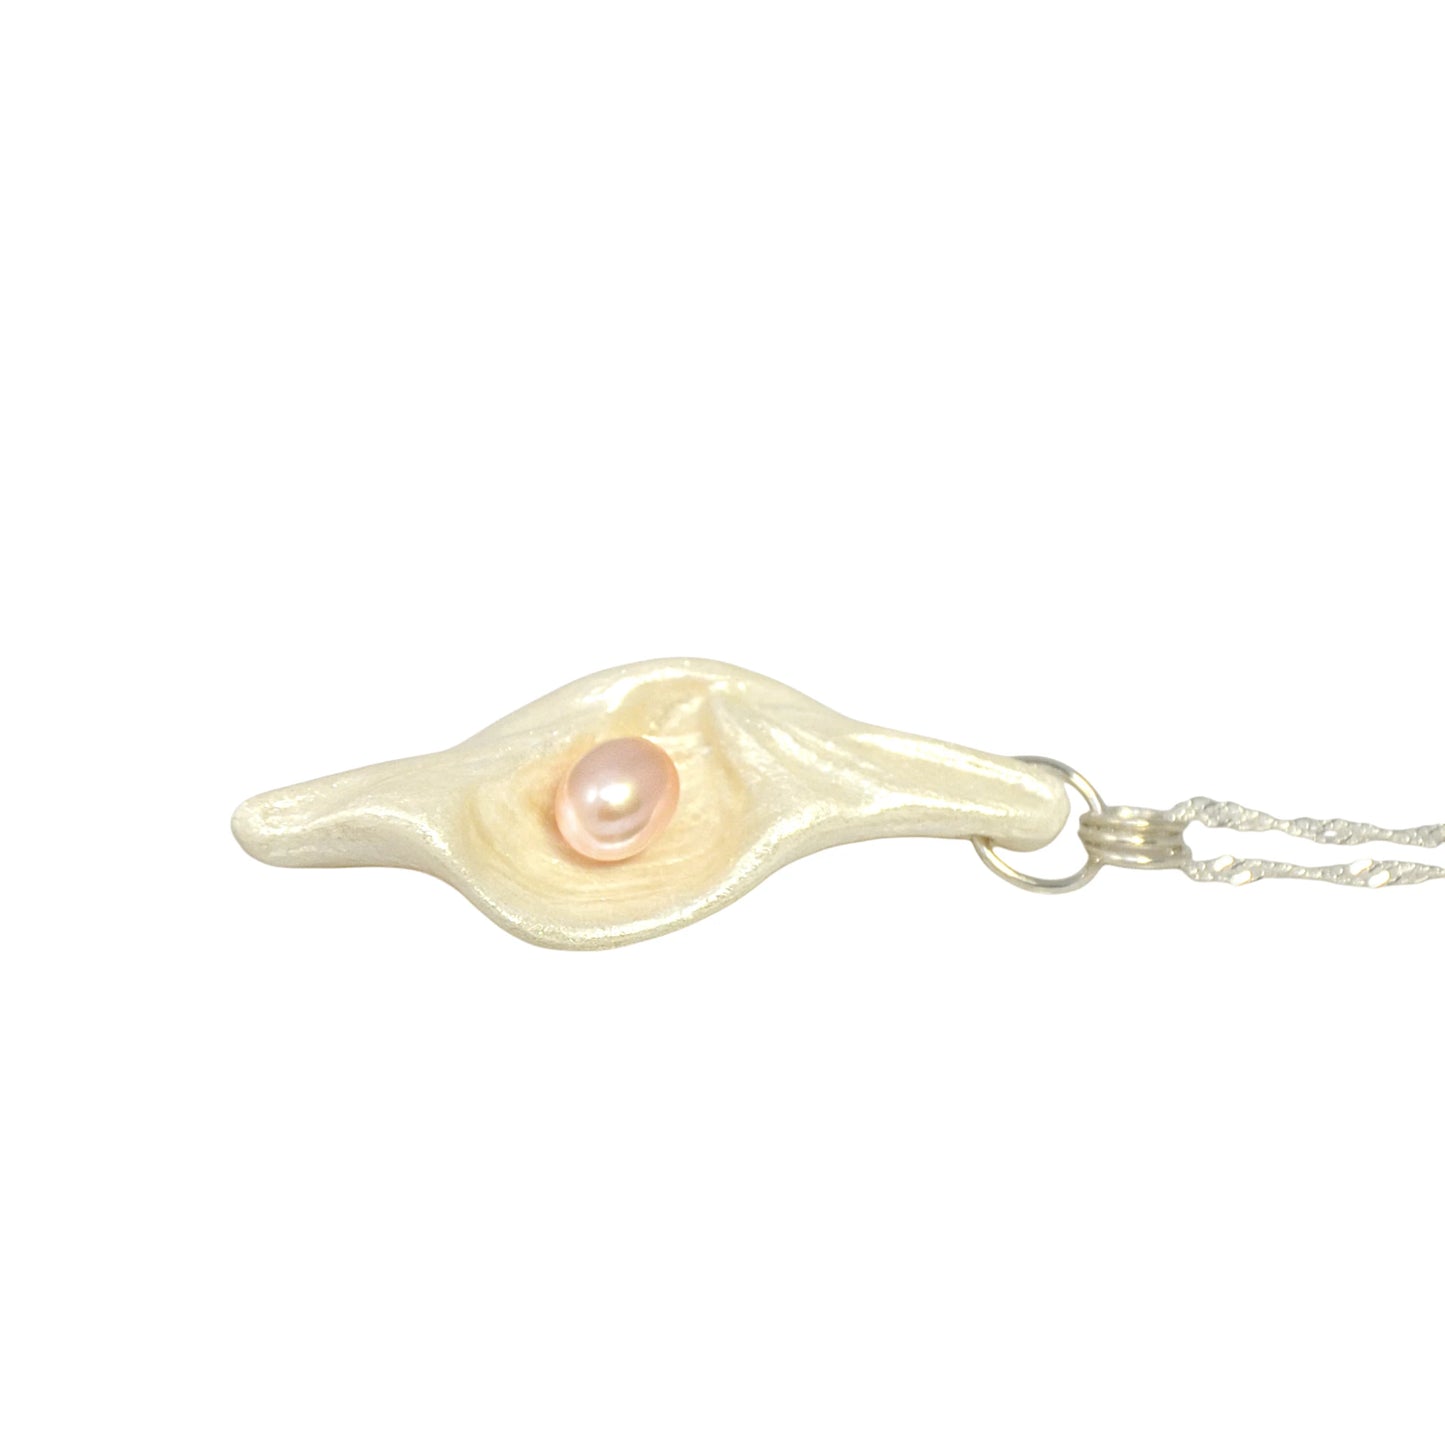 Glow natural seashell pendant with a pink freshwater pearl. The pendant is laying on a tabletop.